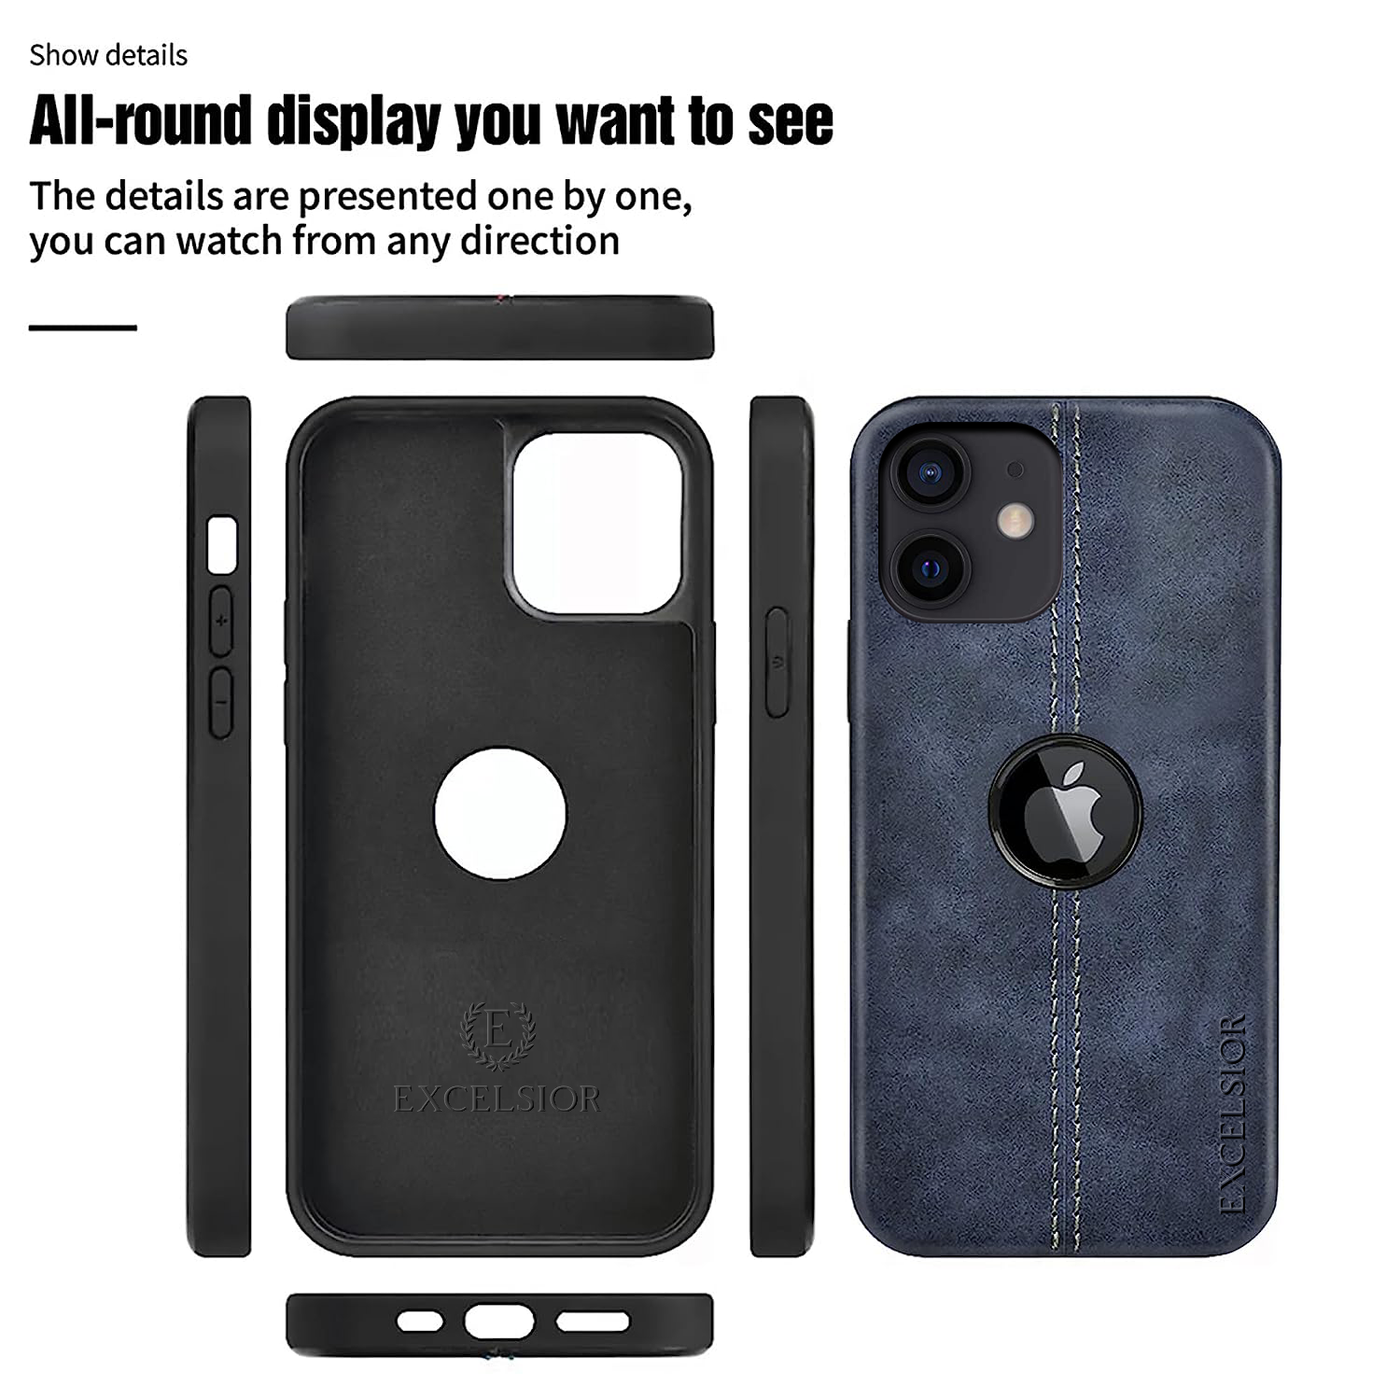 Excelsior Premium Retro PU Leather Back Cover case For Apple iPhone 12 | 12 Pro